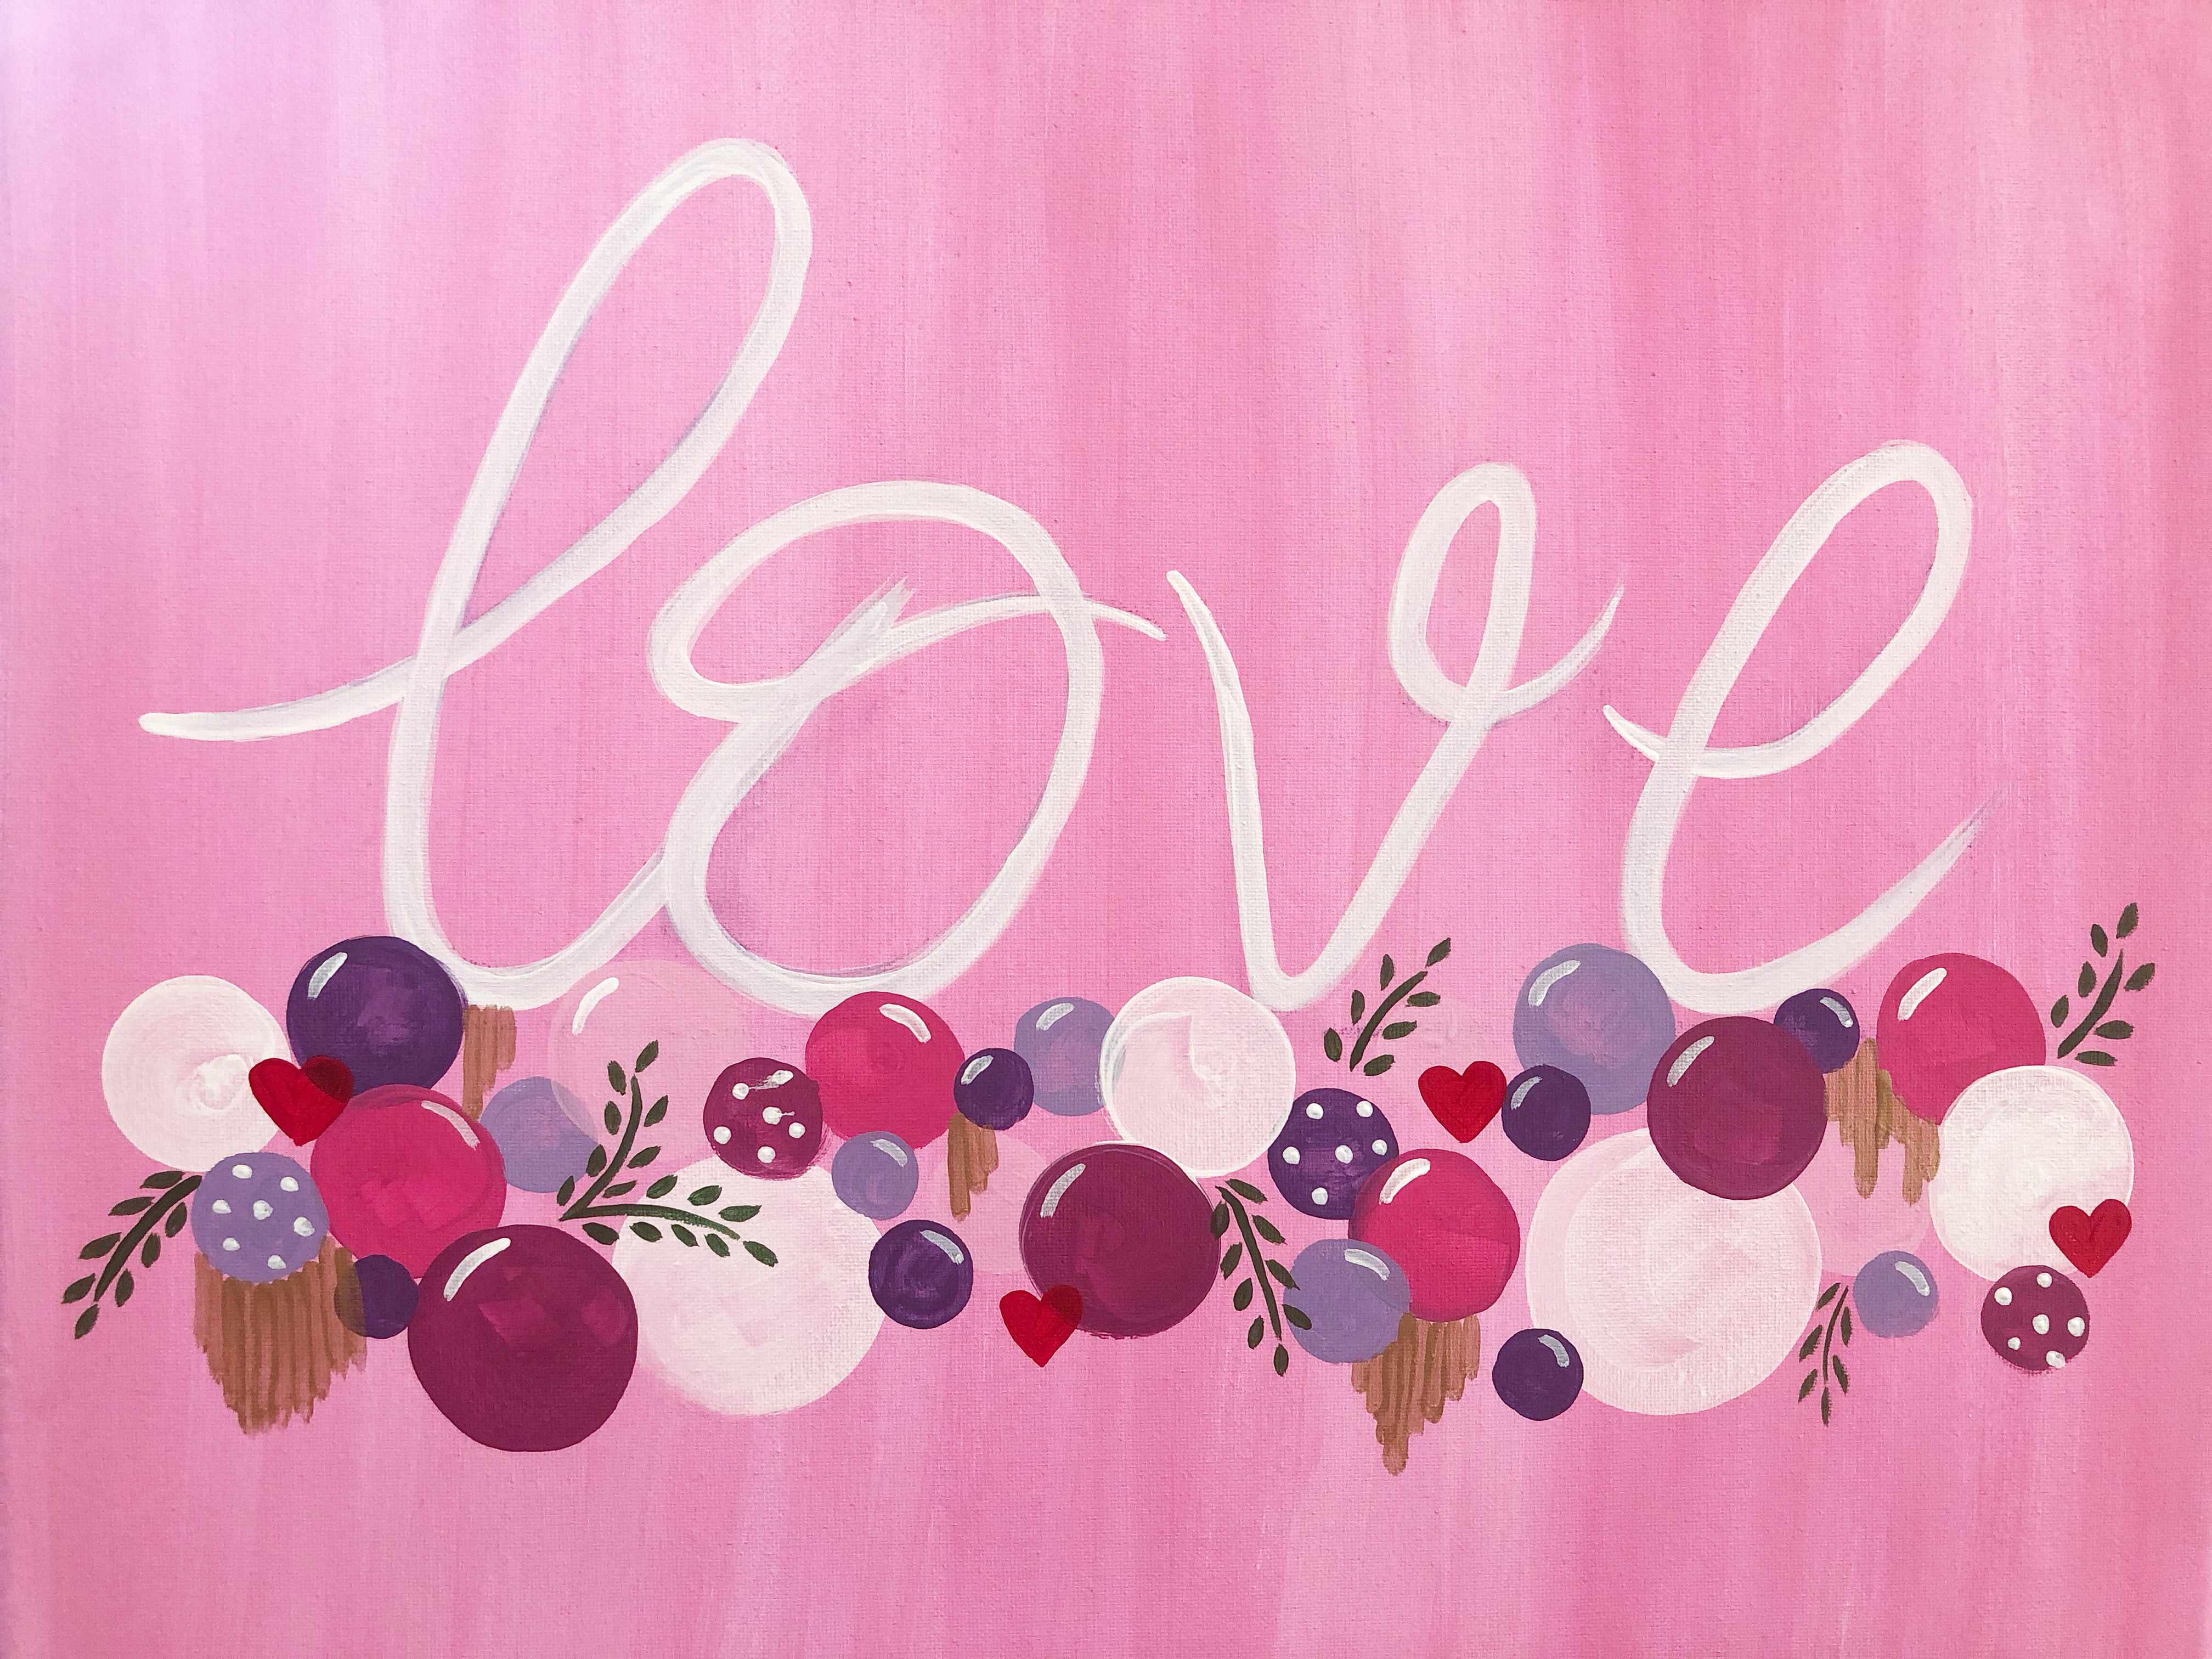 A Love balloon garland experience project by Yaymaker